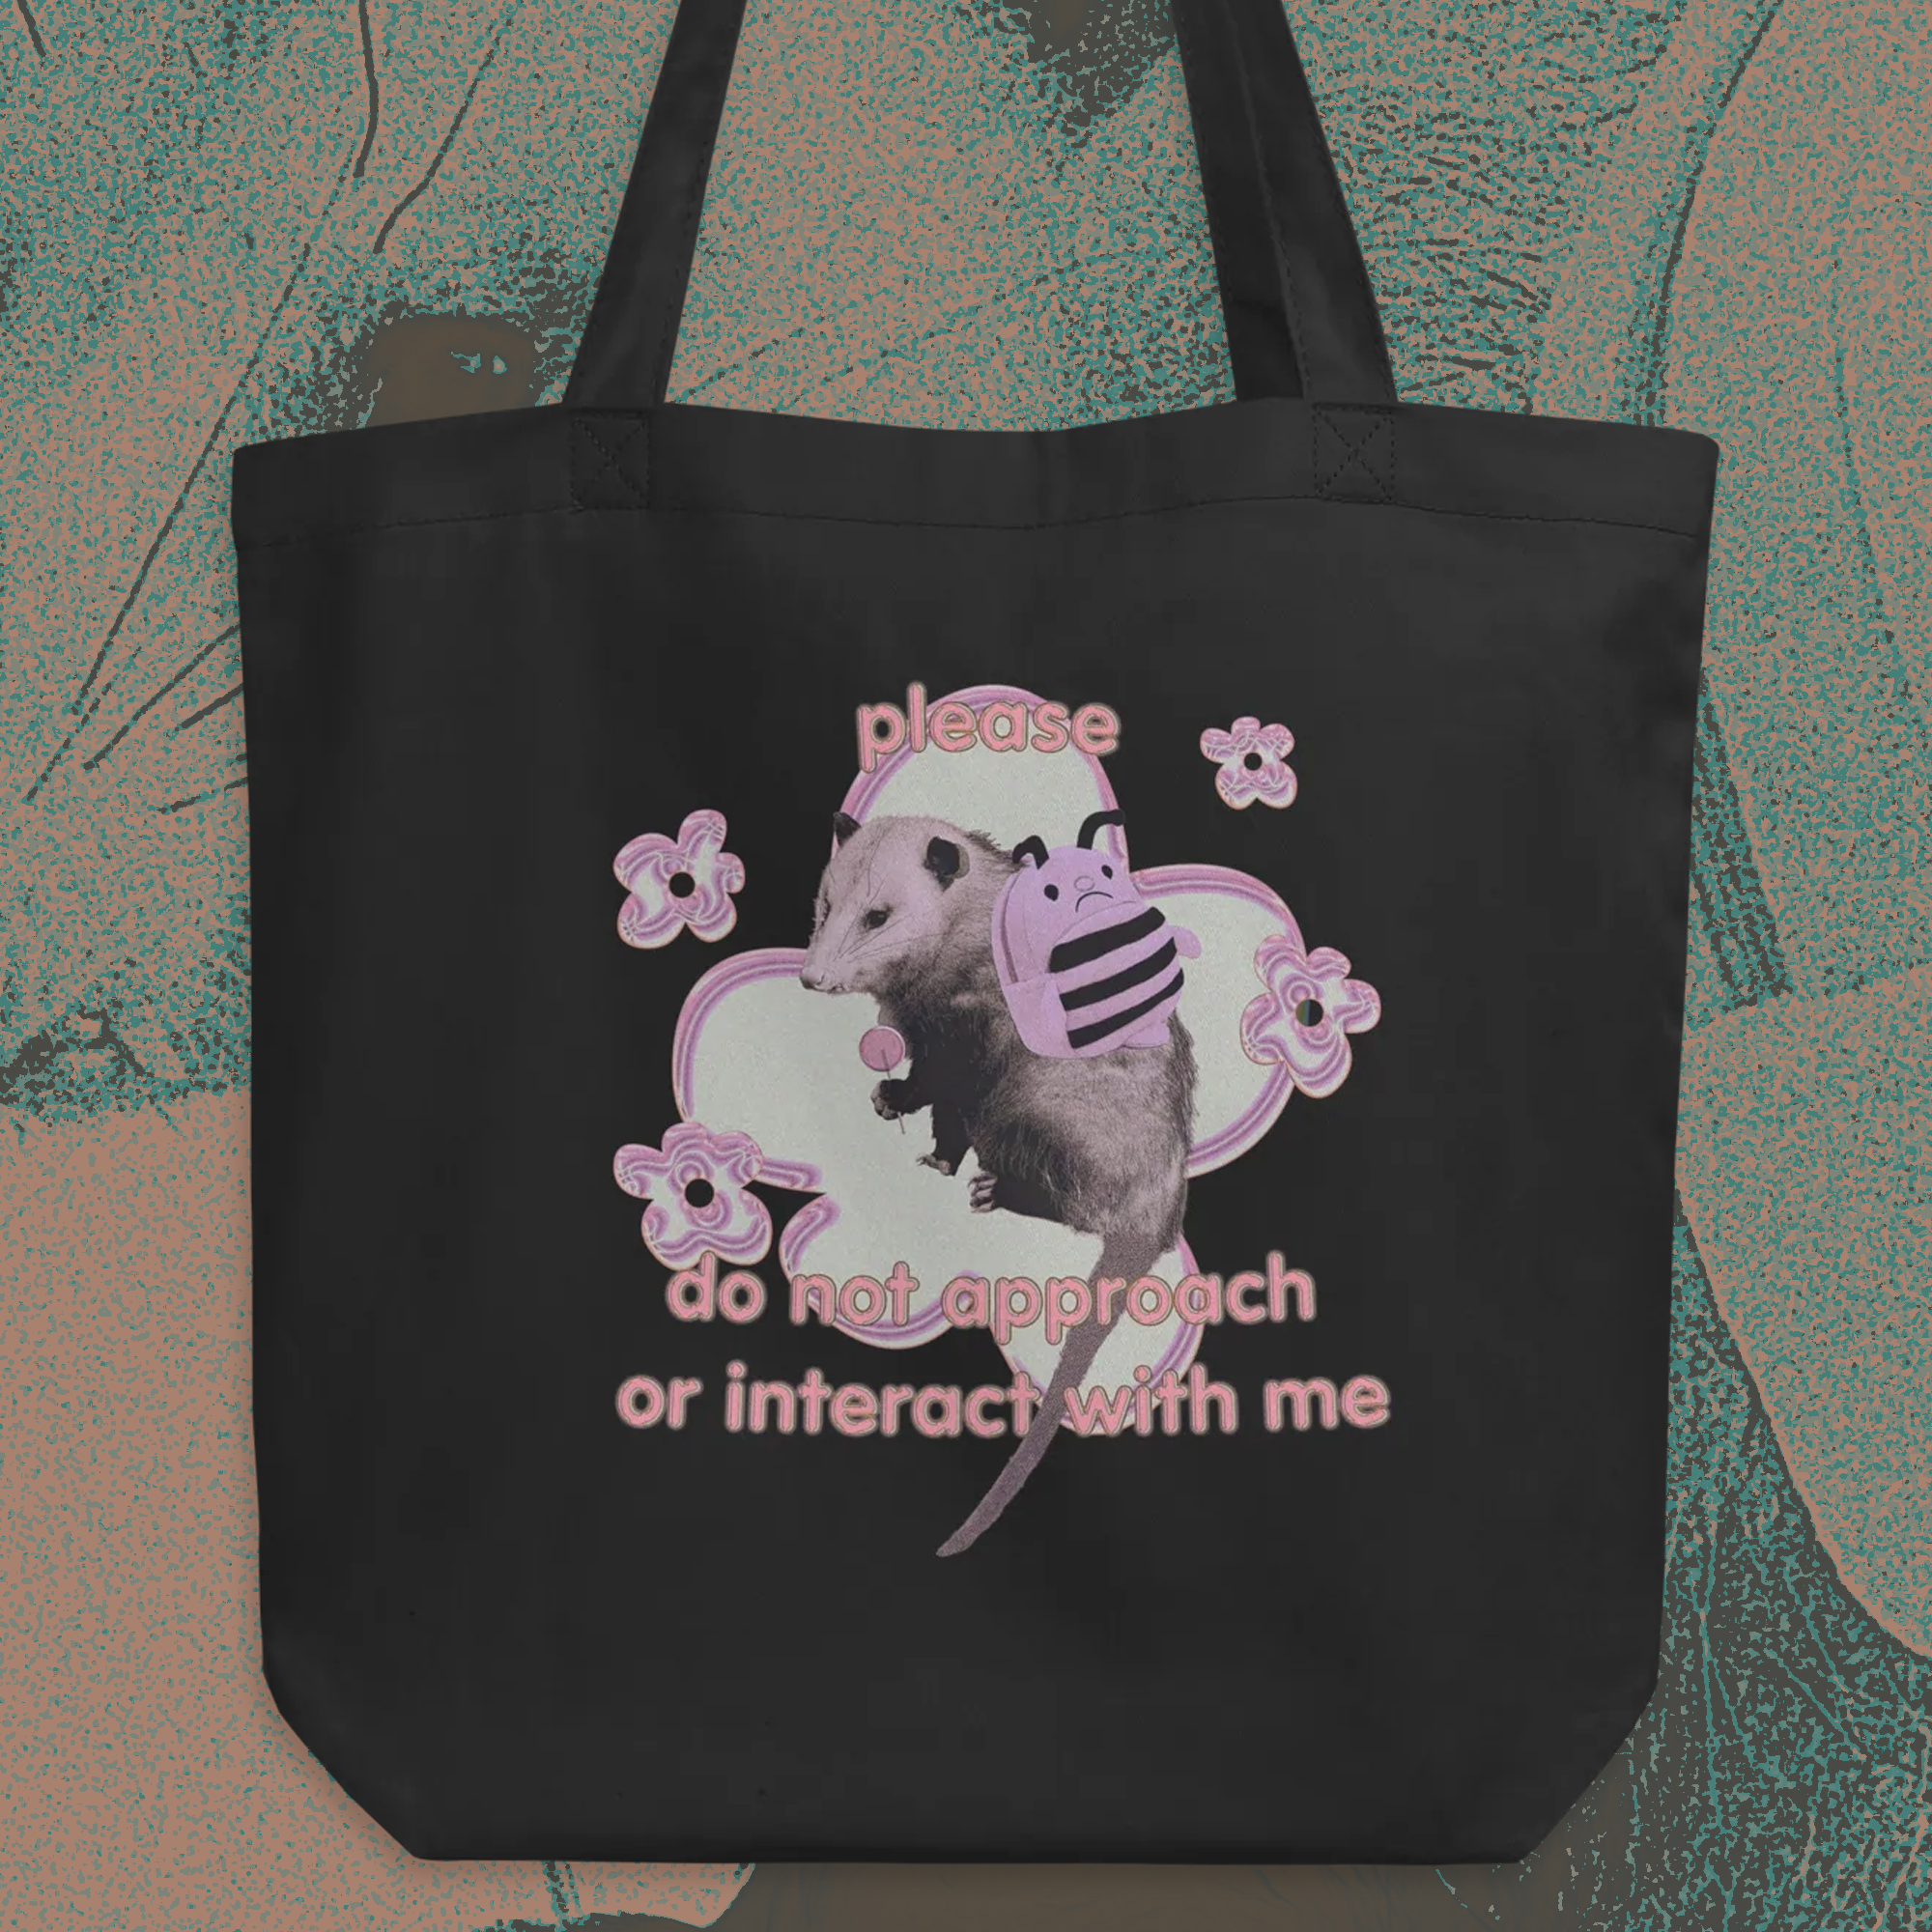 do not approach me tote